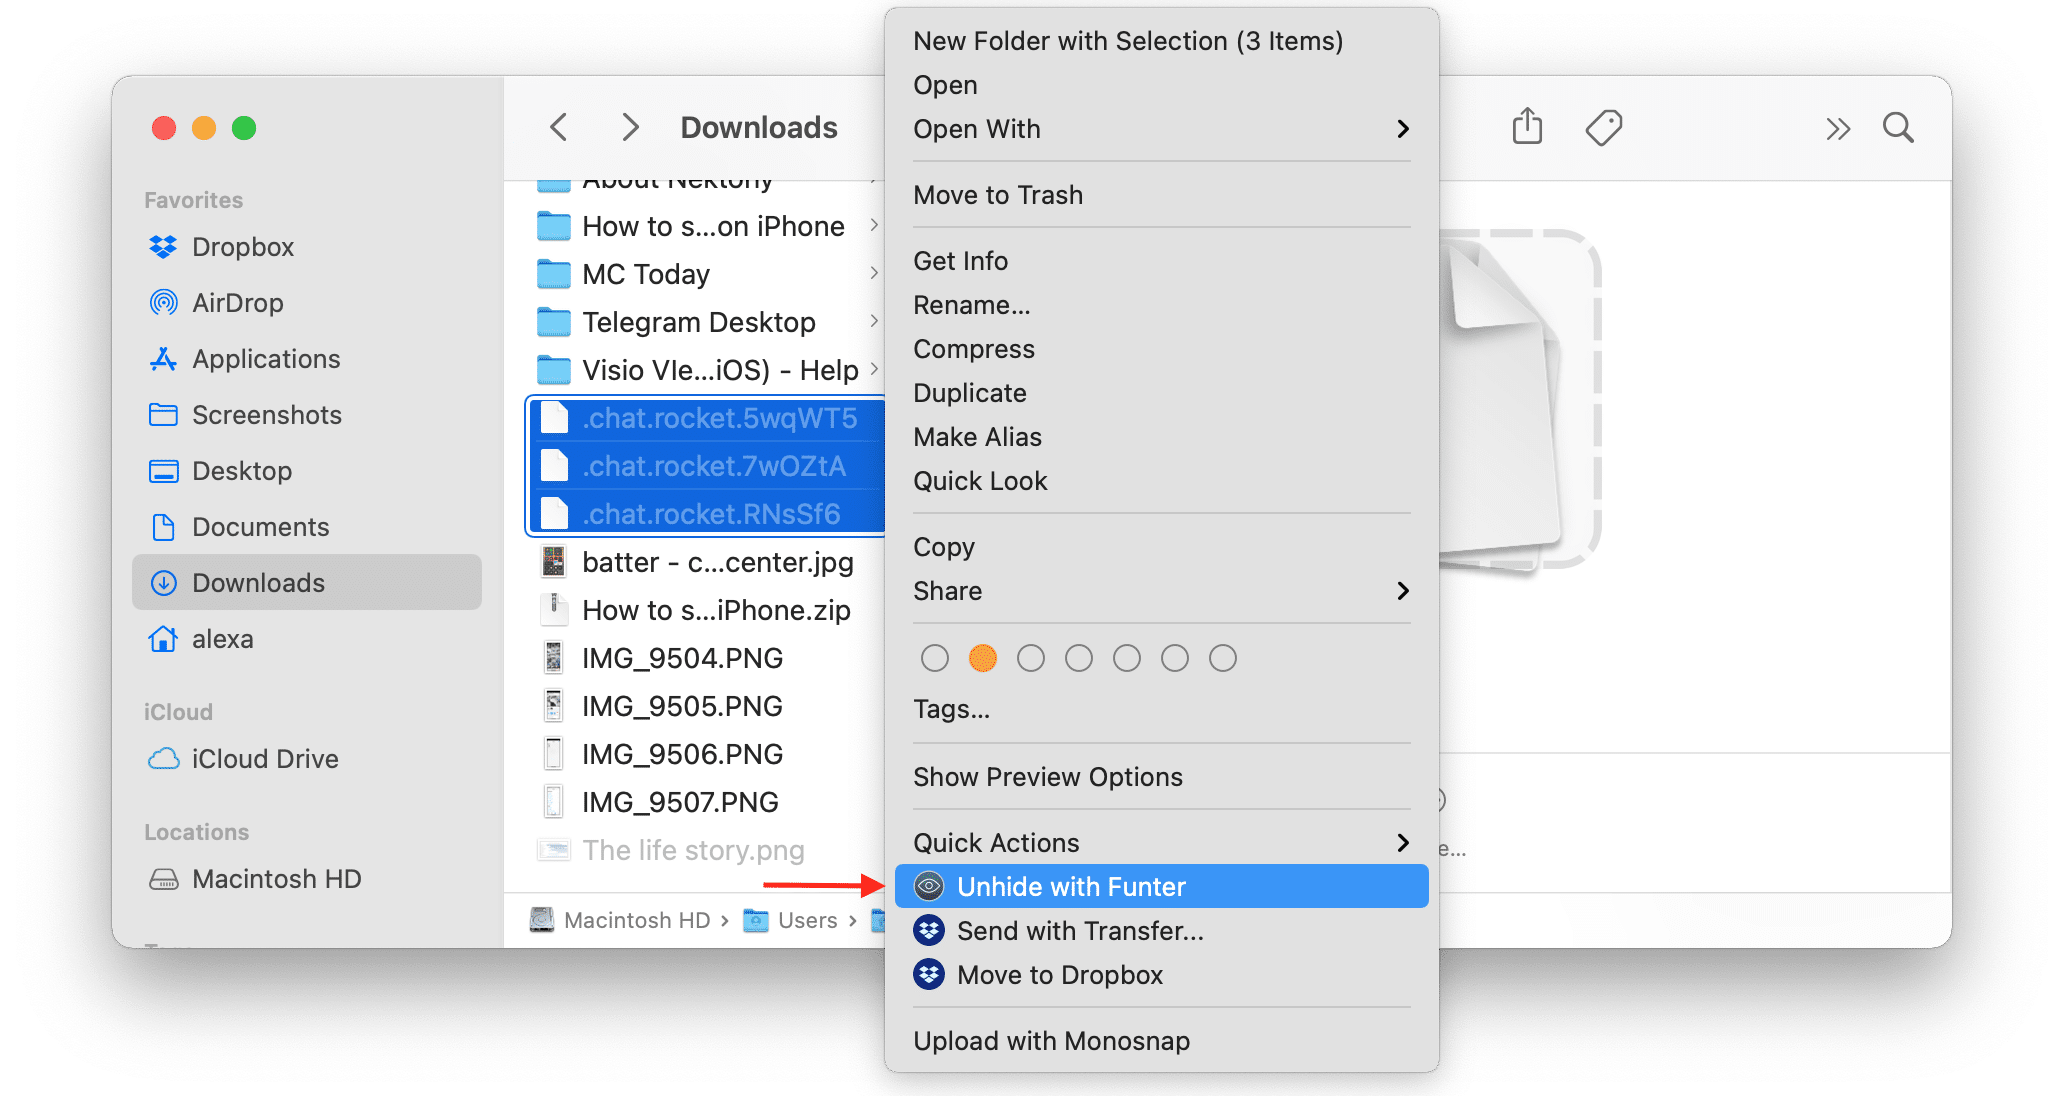 Unhide with Funter option selected in Finder drop-down menu